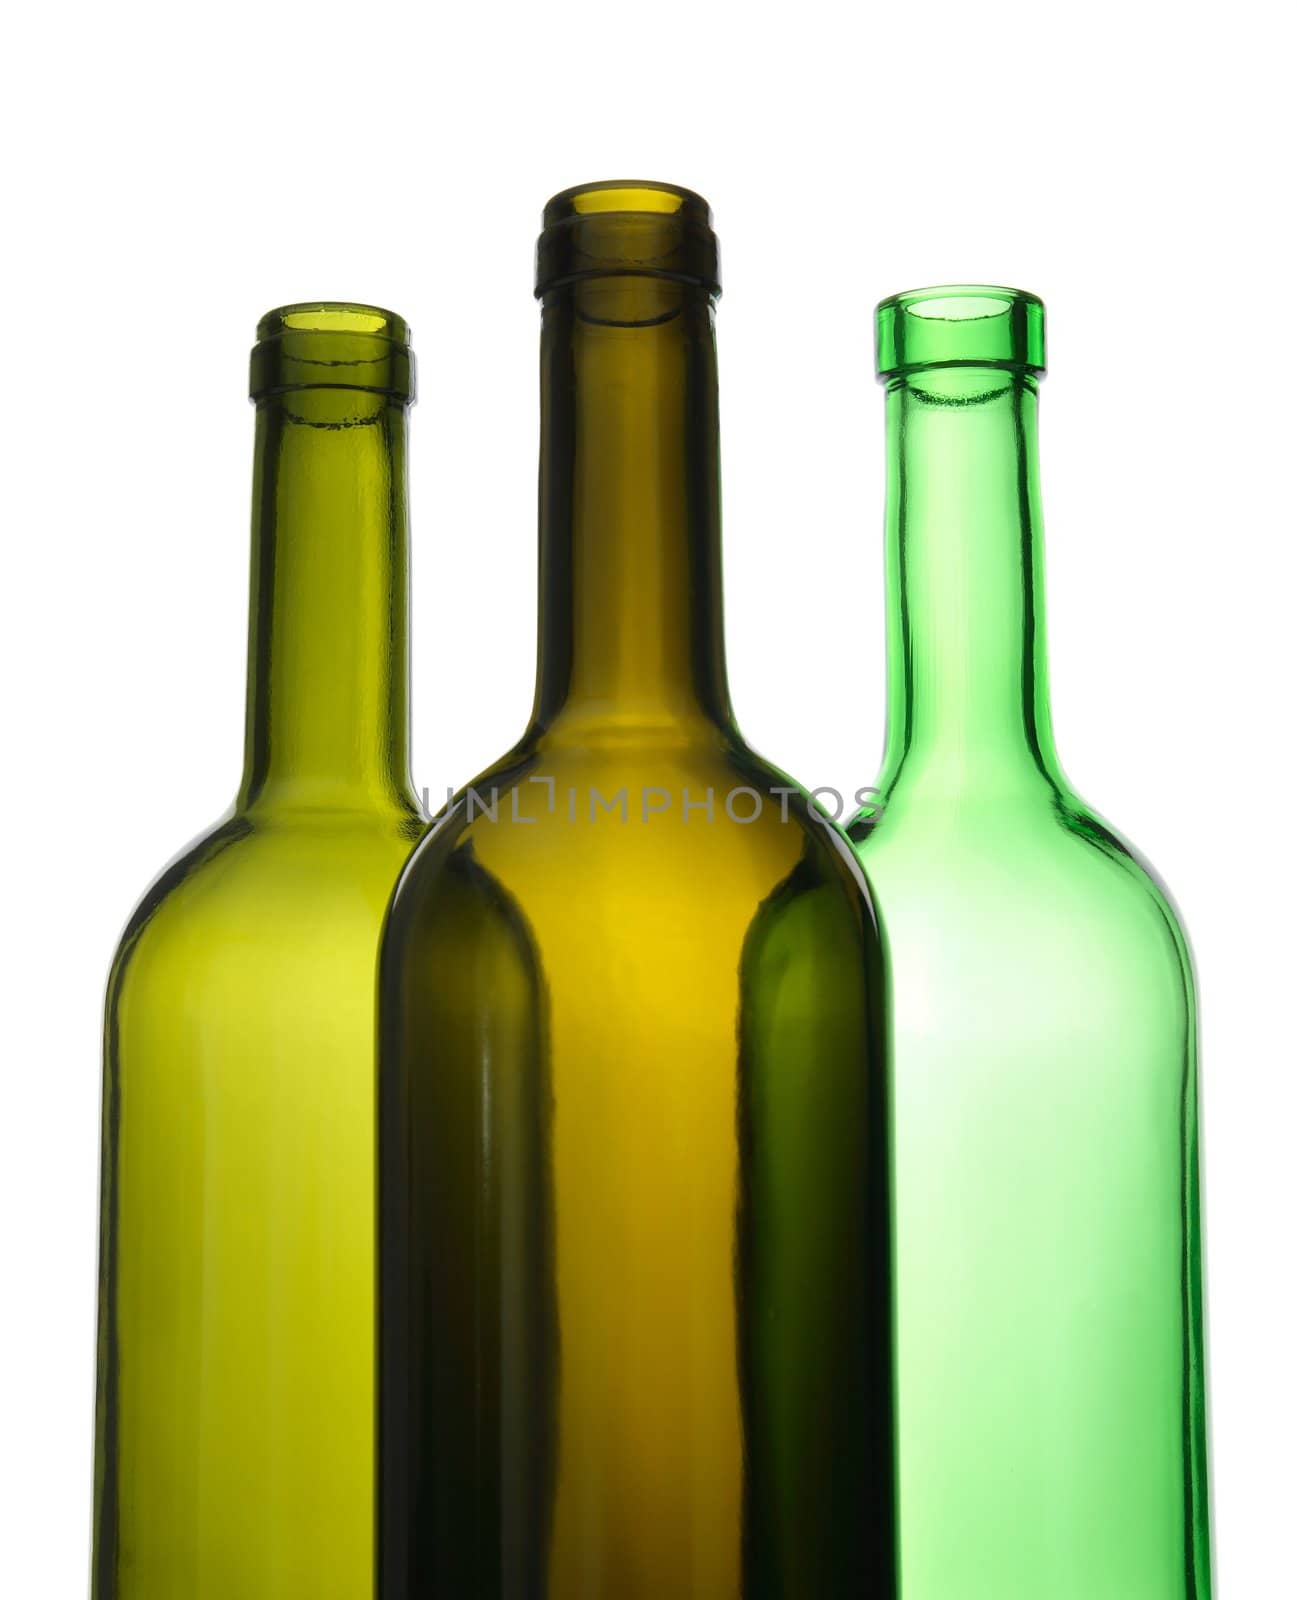 Three empty wine bottles for recycling by anikasalsera